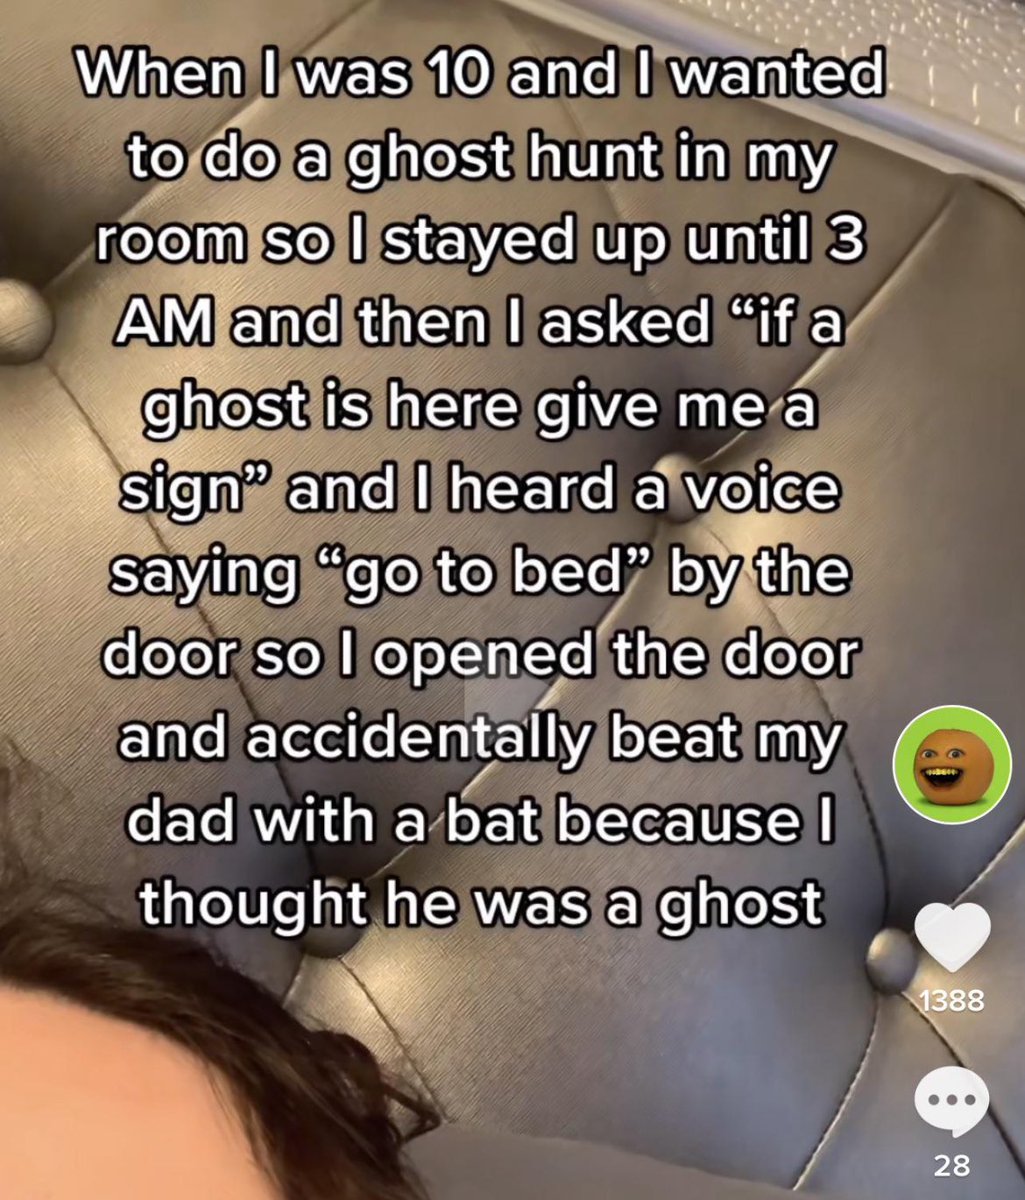 TikTok screenshots - photo caption - When I was 10 and I wanted to do a ghost hunt in my room so I stayed up until 3 Am and then I asked